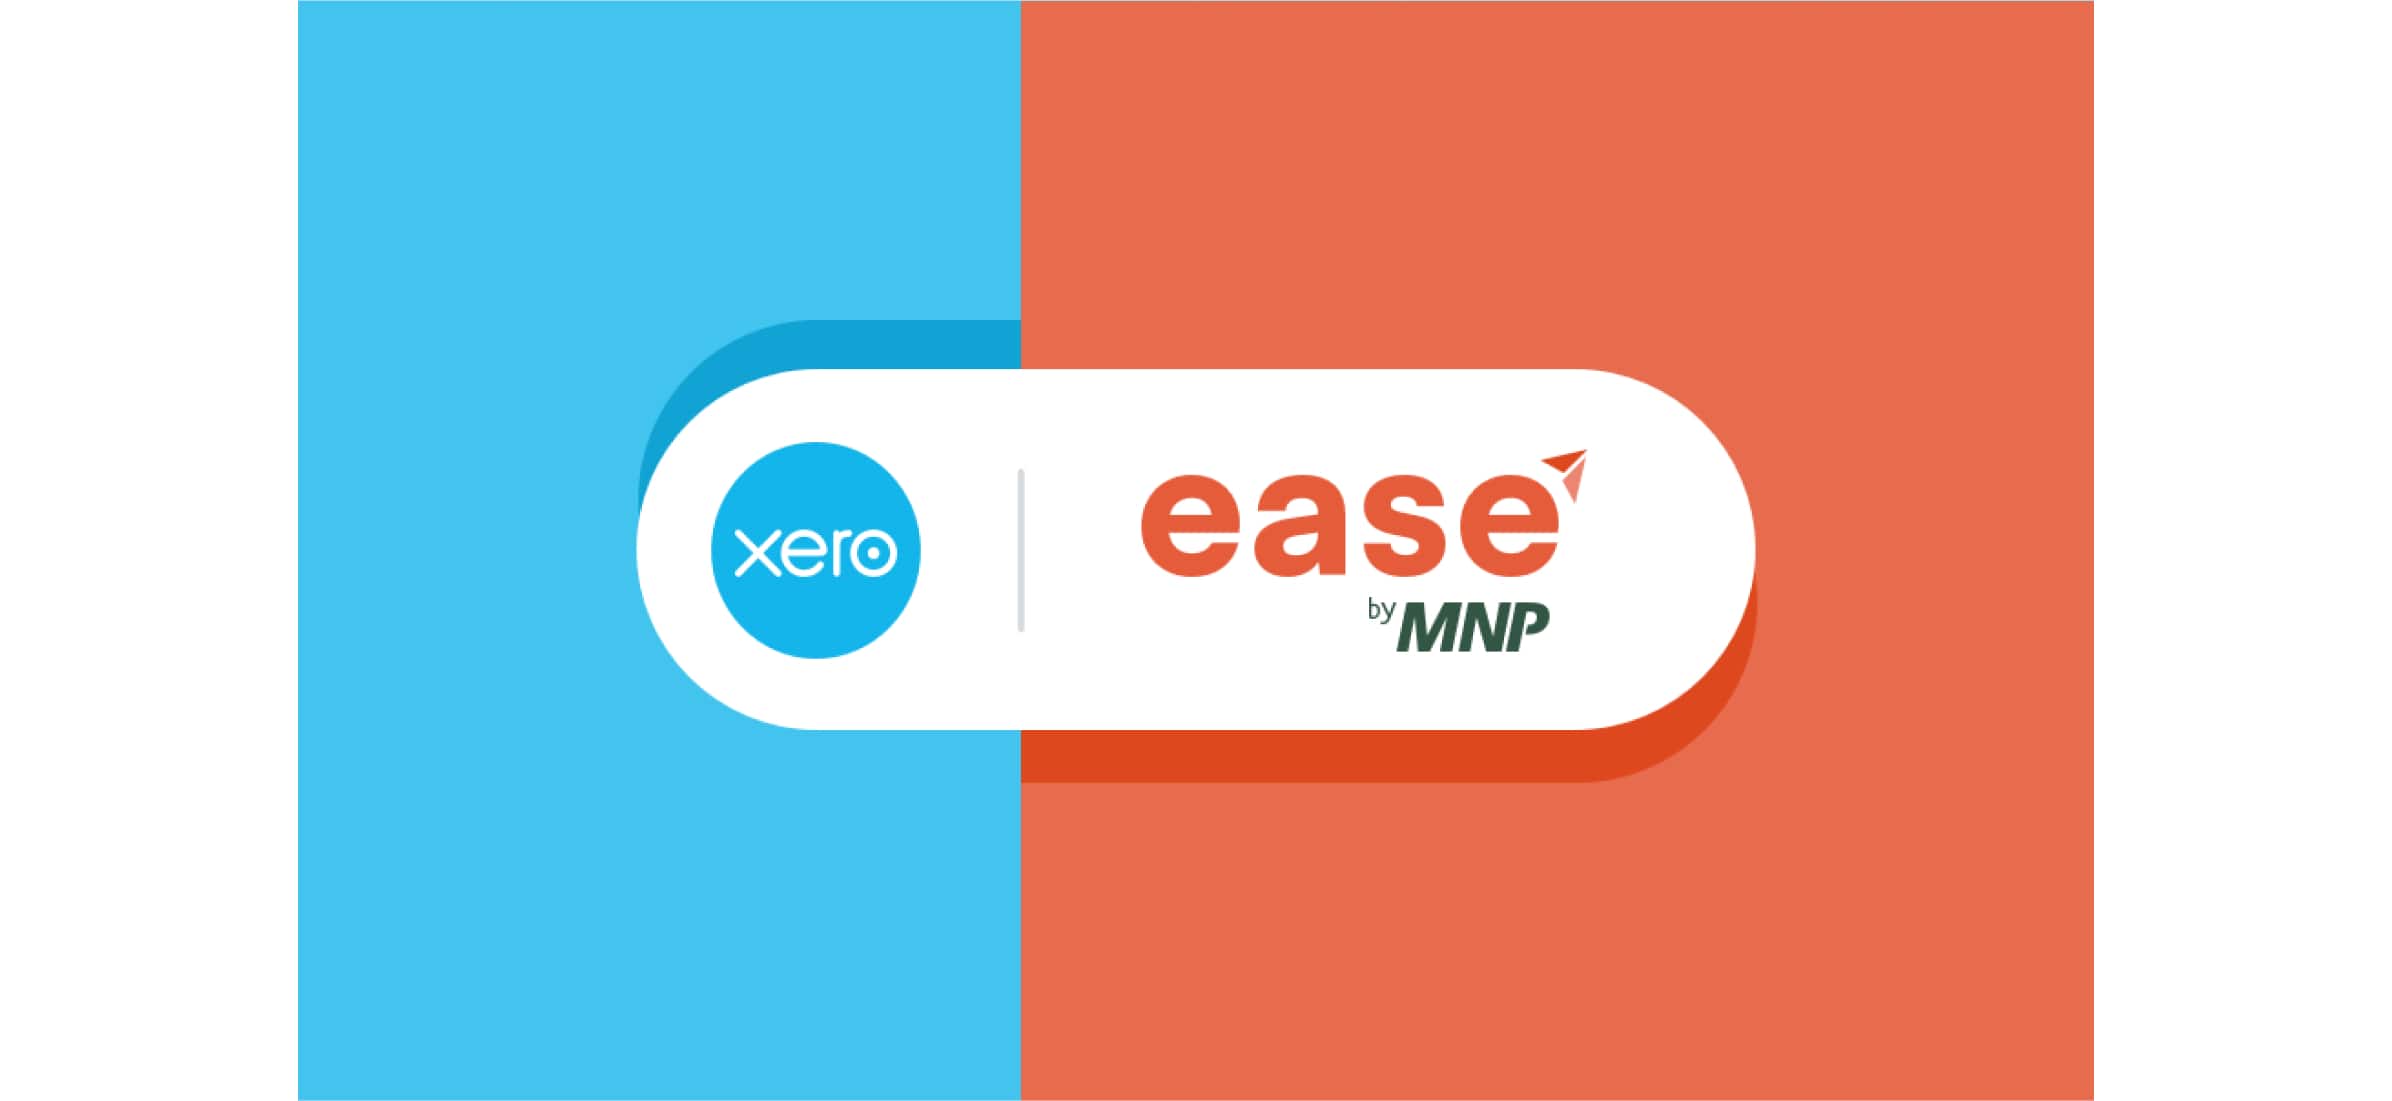 Logos of Xero and ease by MNP on a blue and orange background.